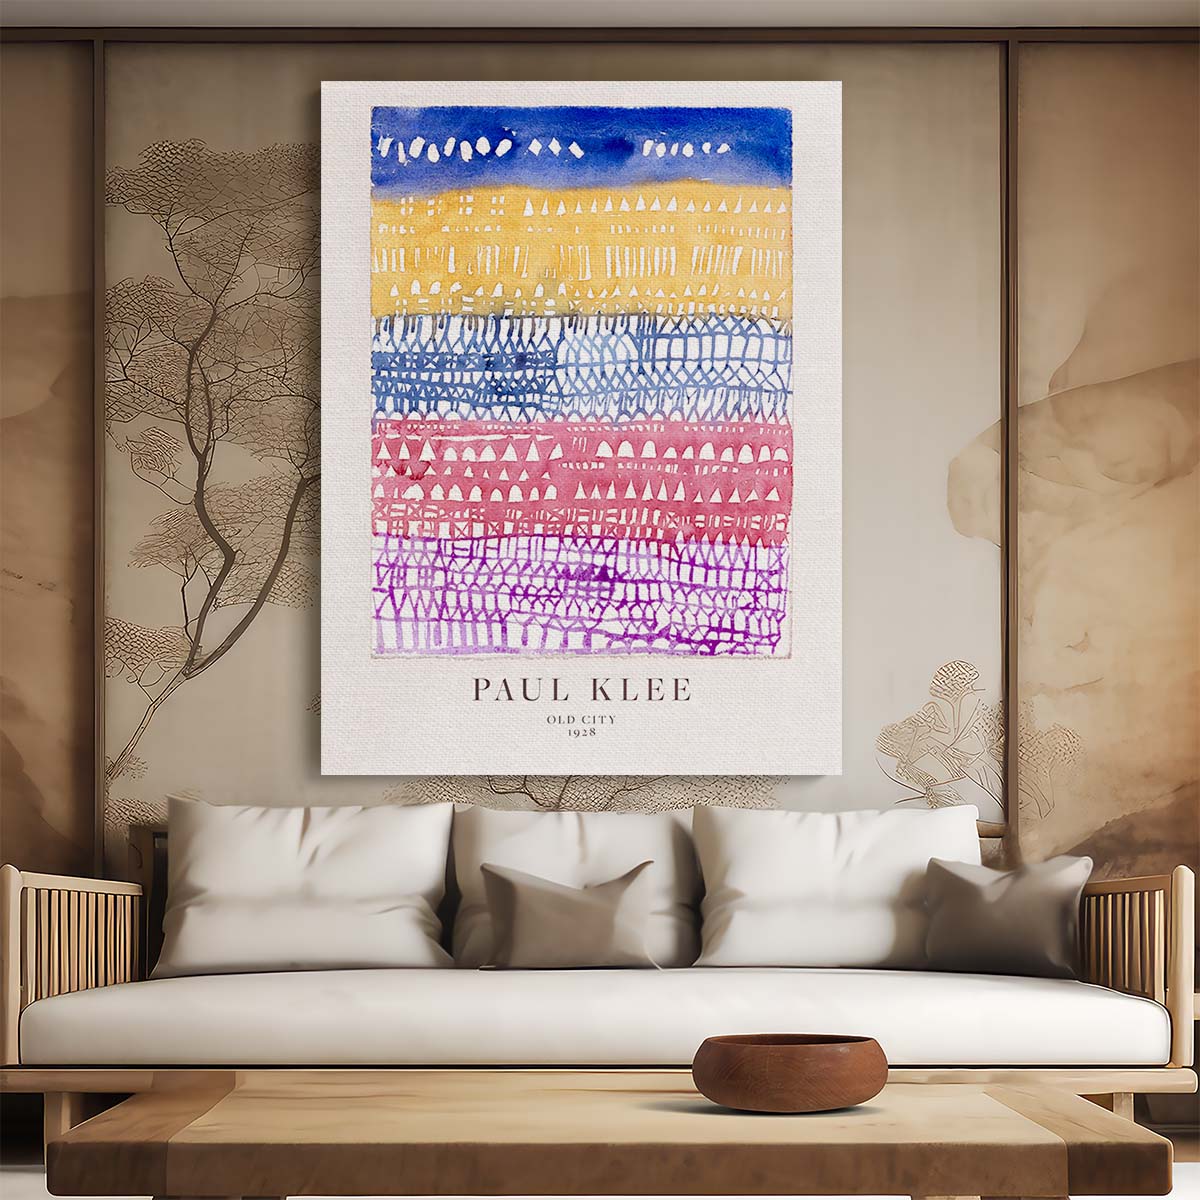 1928 Paul Klee Old City Watercolor Illustration Art Poster by Luxuriance Designs, made in USA